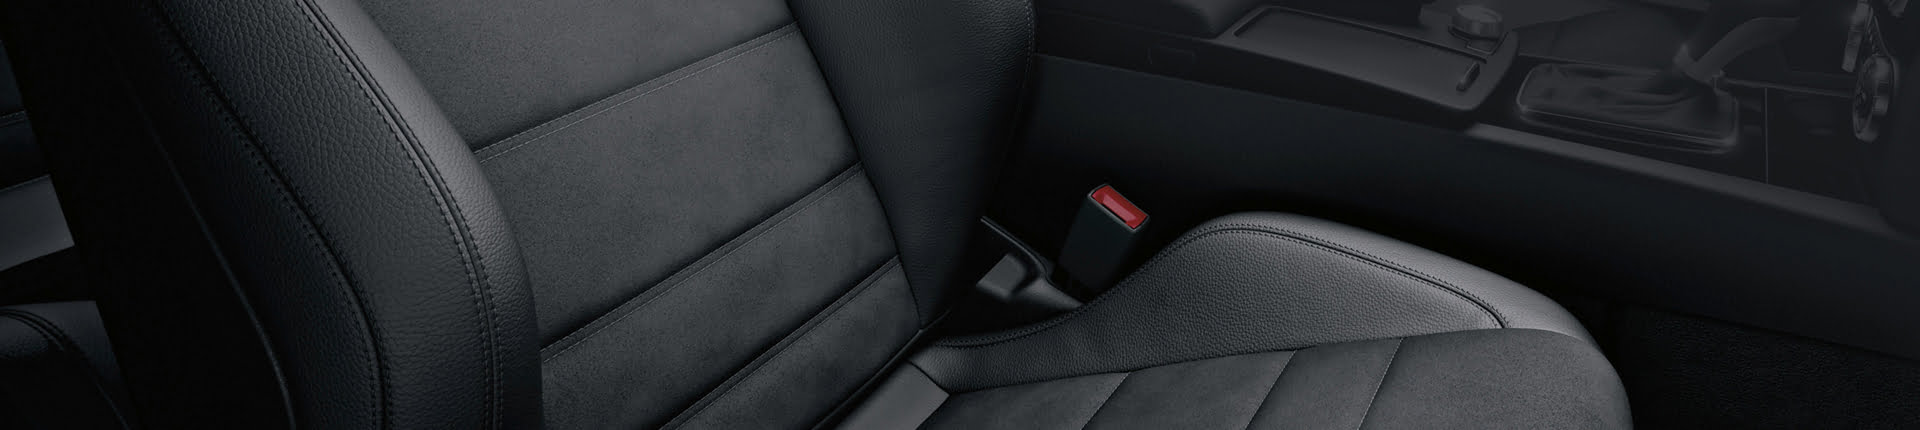 LEATHER SEATS & UPHOLSTERY PROTECTION SHIELD SPRAY